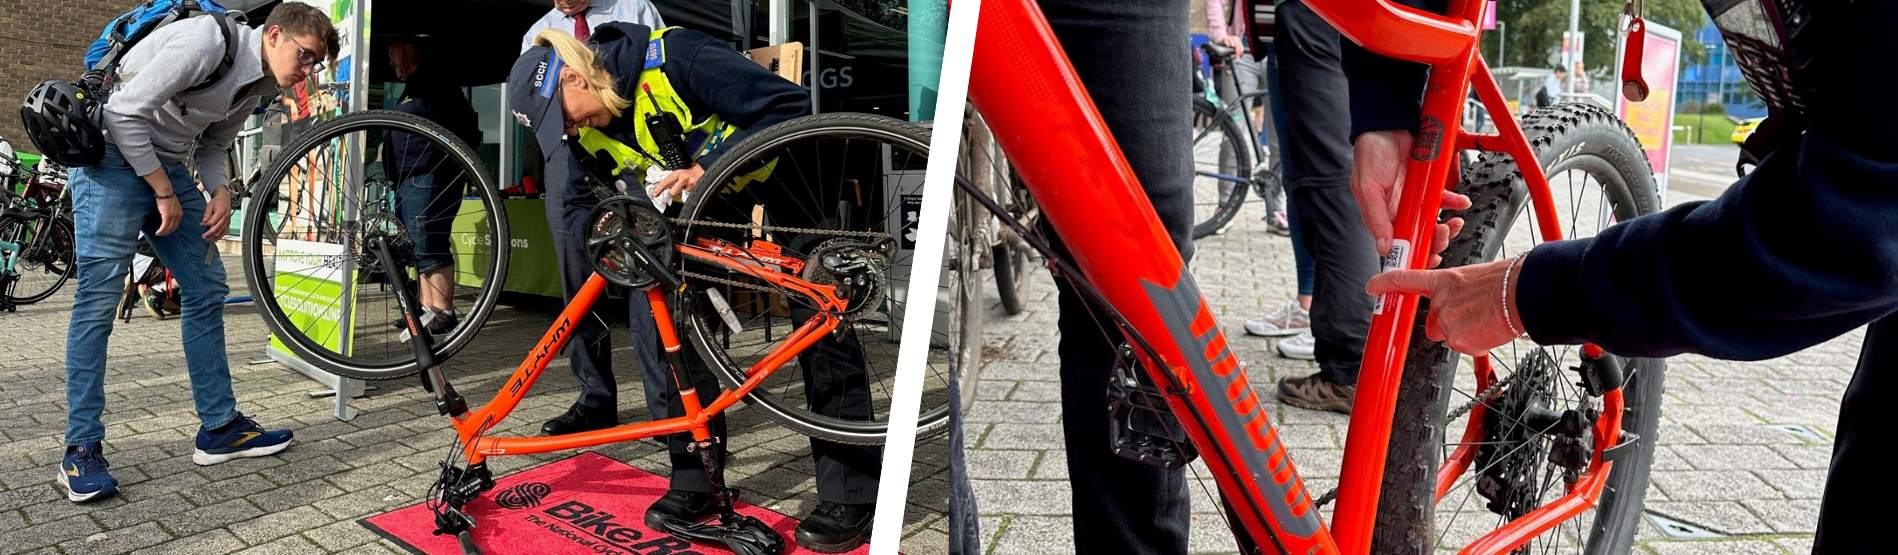 Two images of bikes being registered